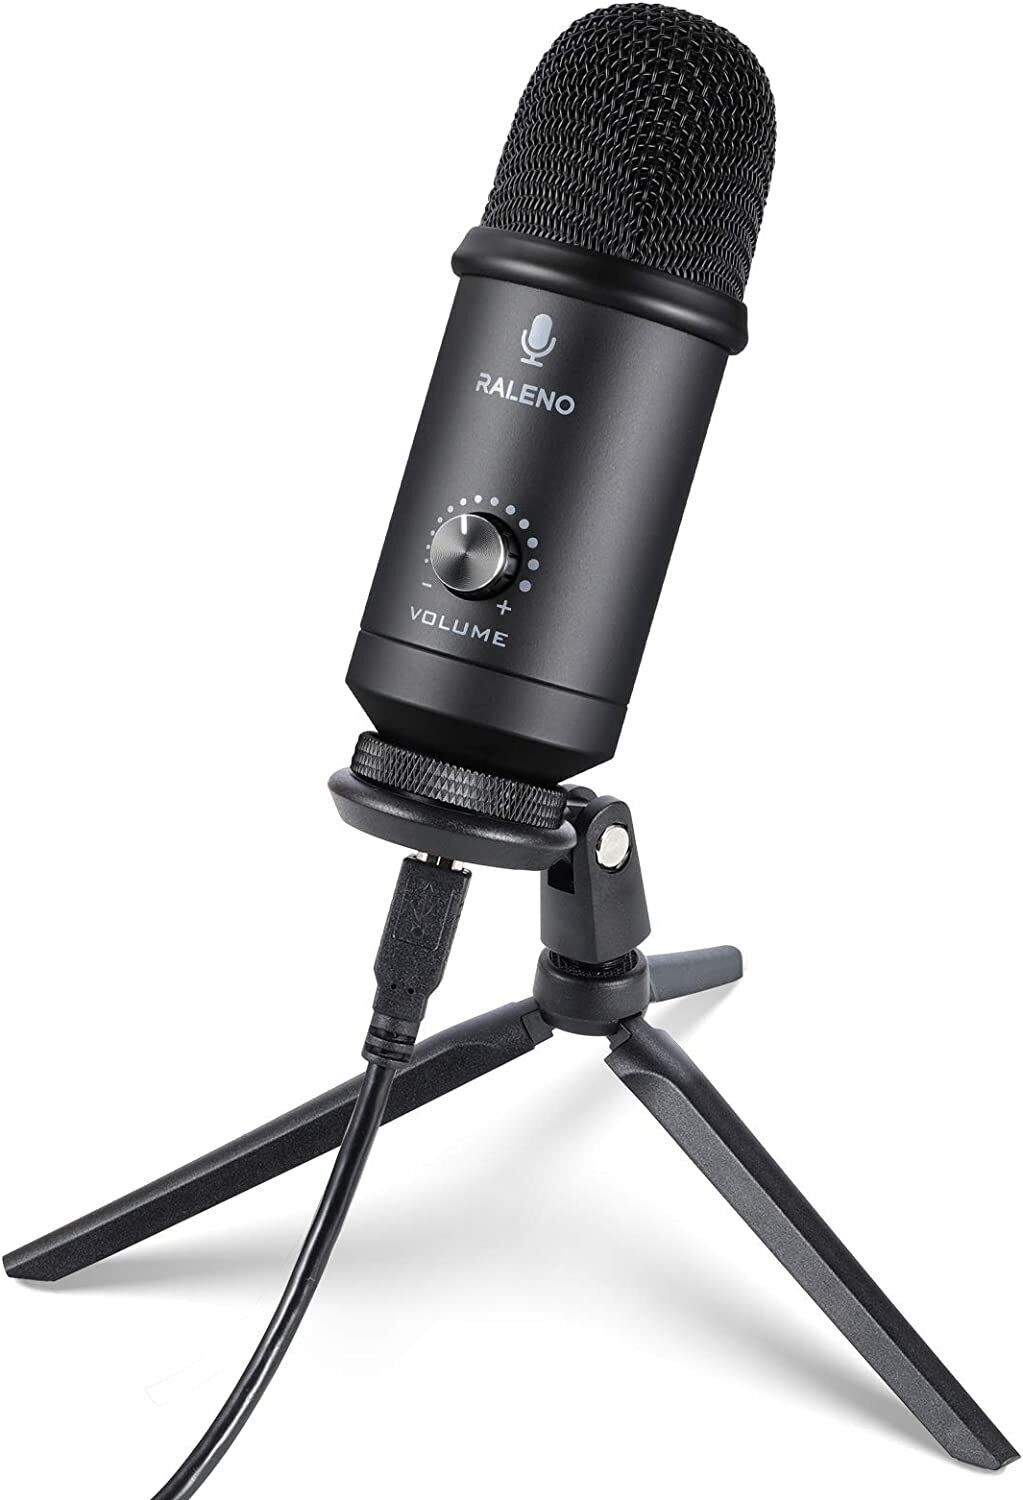 Usb Microphone For Computer,raleno Pc Cardioid Microphone, Professional 78db Snr